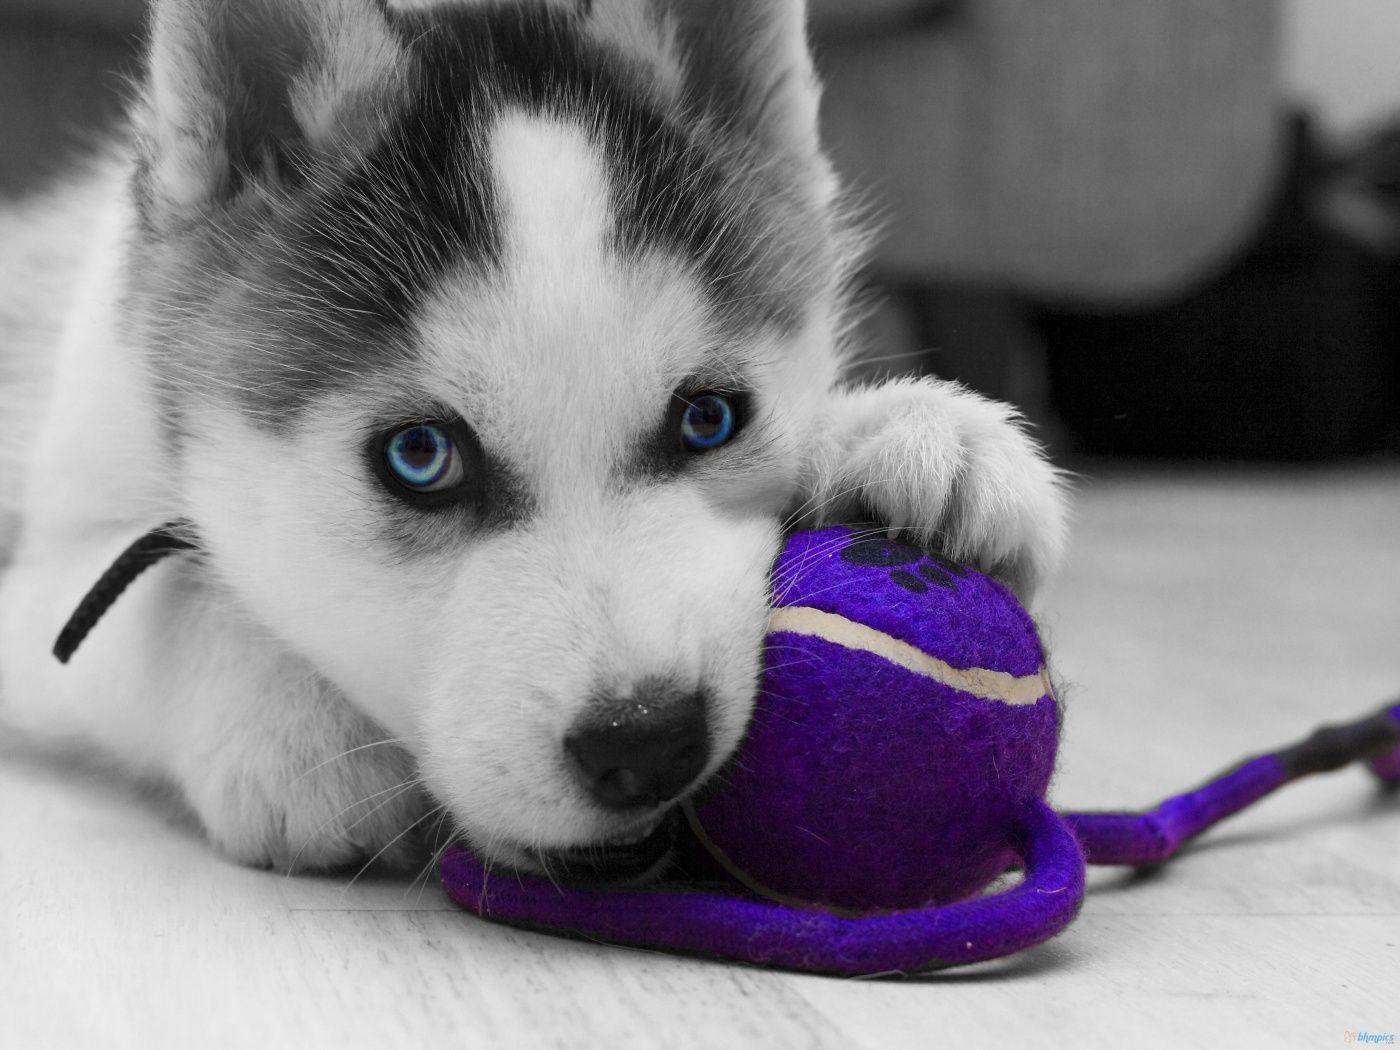 Siberian Husky puppy with a ball photo and wallpaper. Beautiful